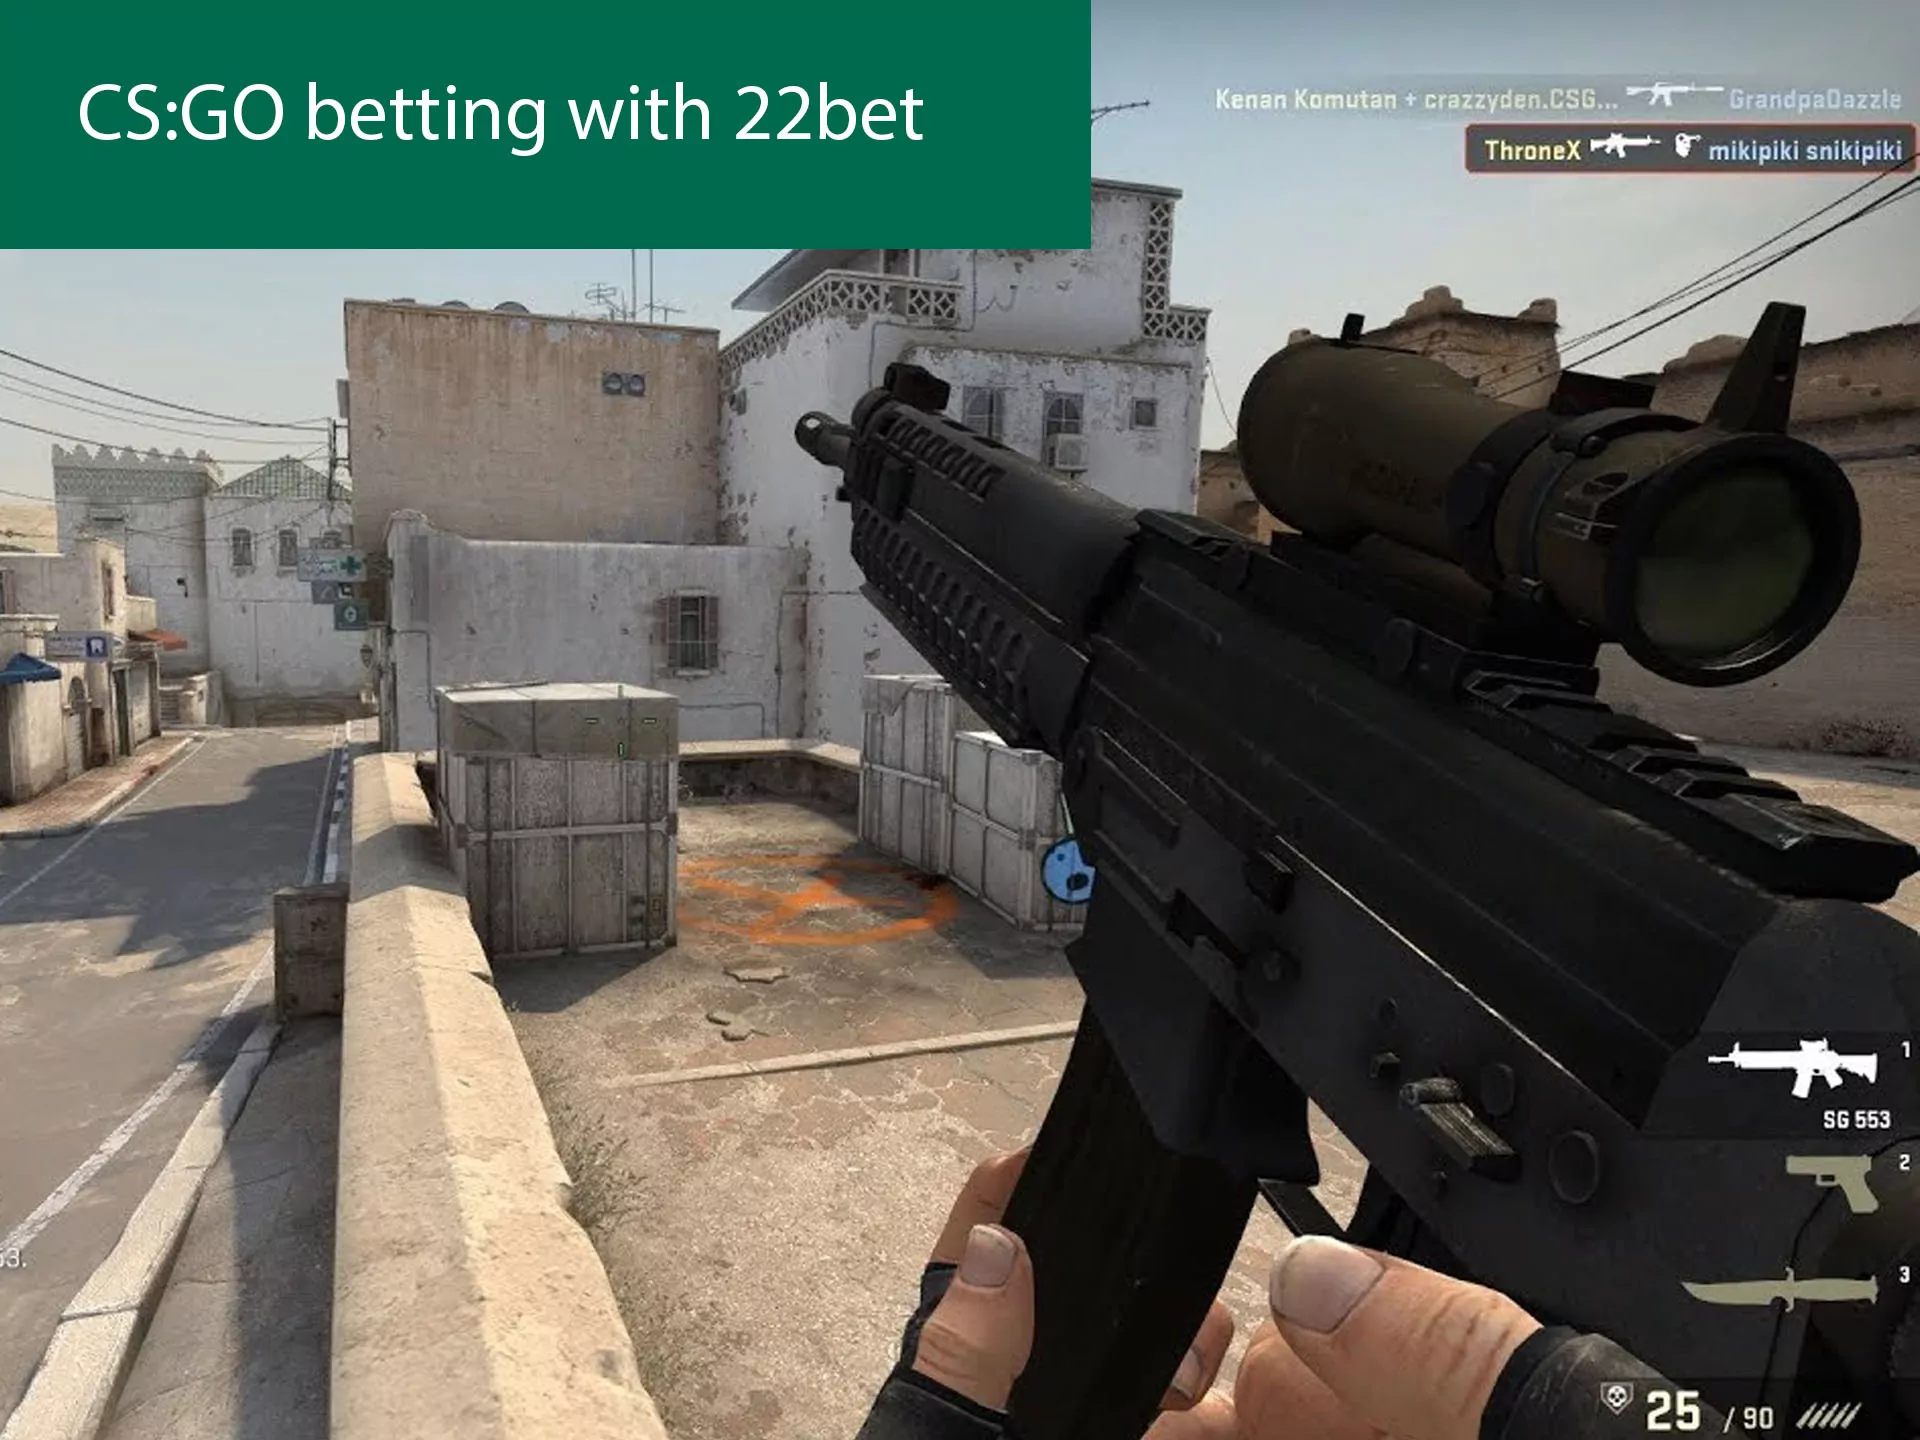 22bet CS GO has more than 20 types of bets.